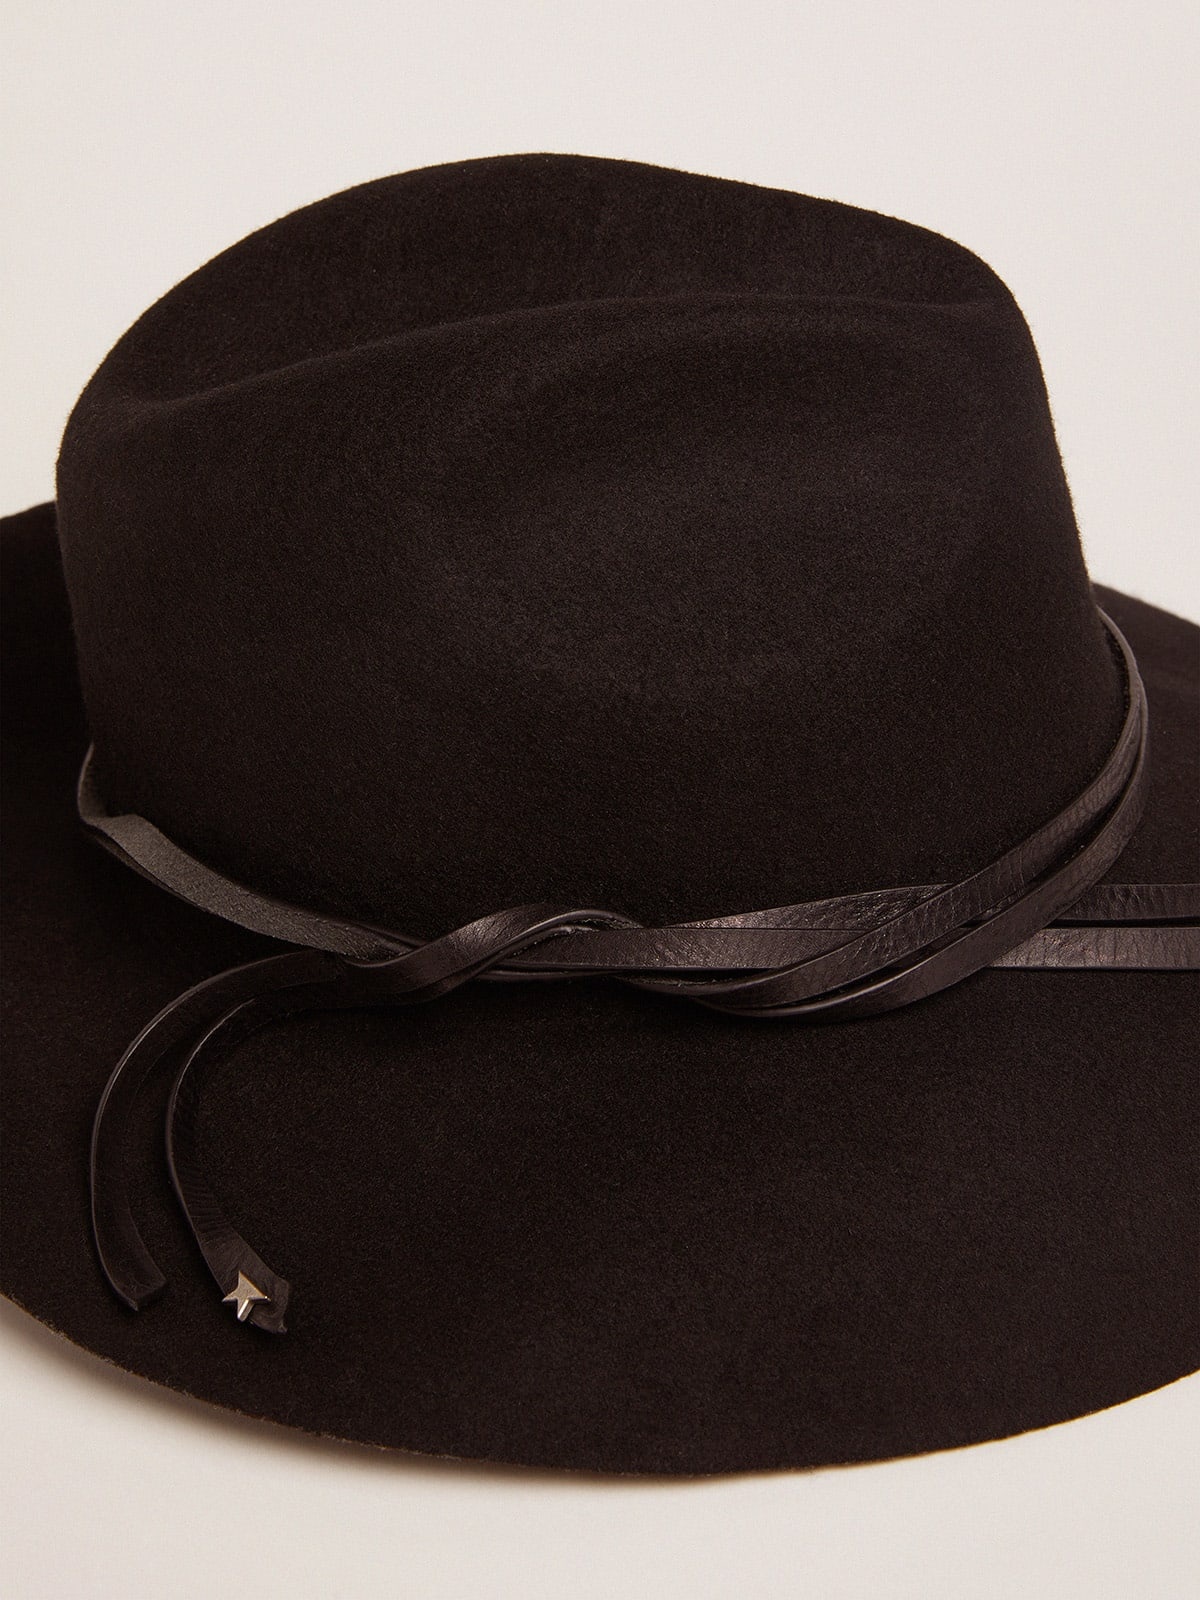 Black hat with leather strap - 2